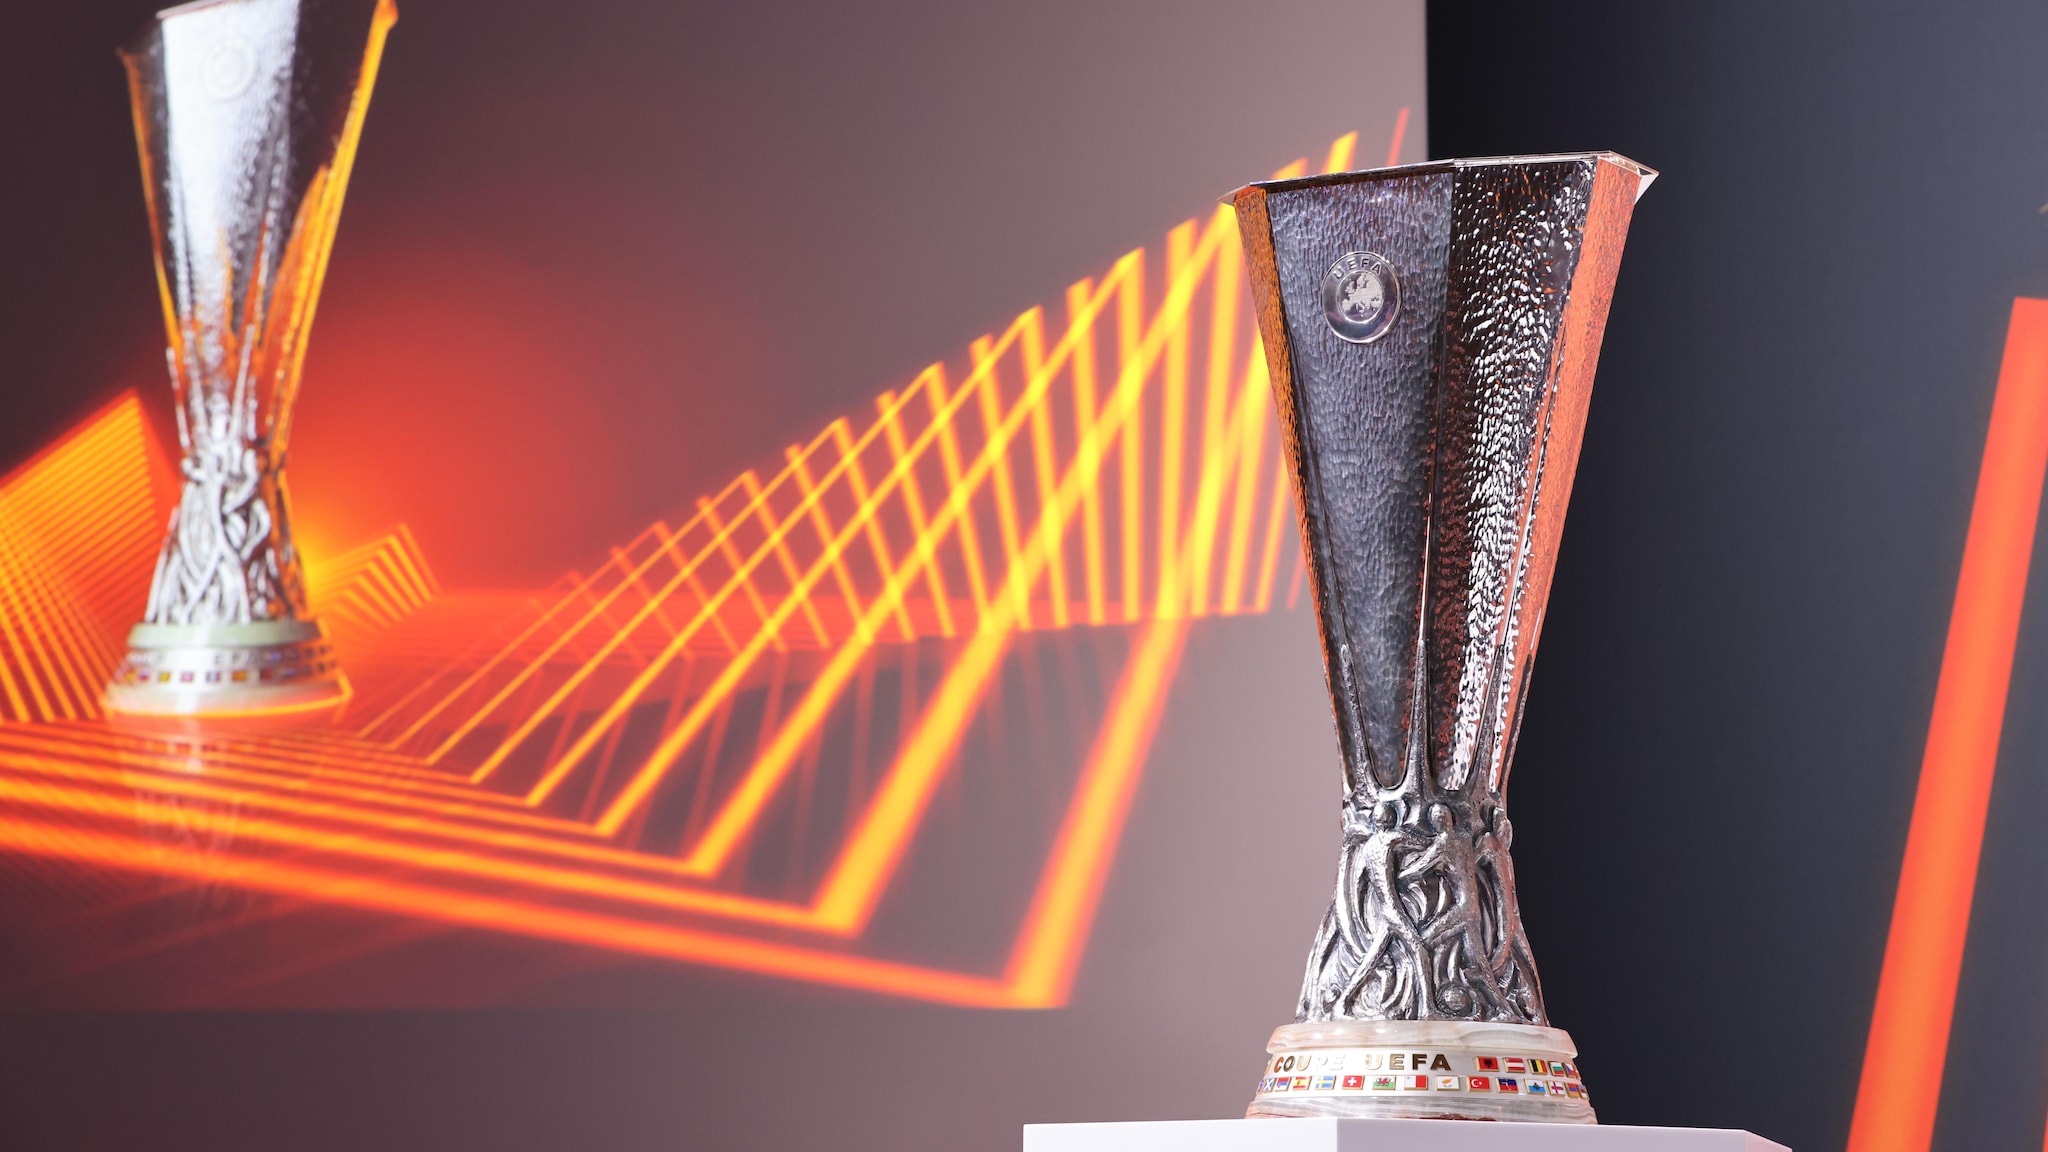 UEFA Europa League round of 16 draw: What is it? Where to watch it? Who are the teams? - UEFA.com